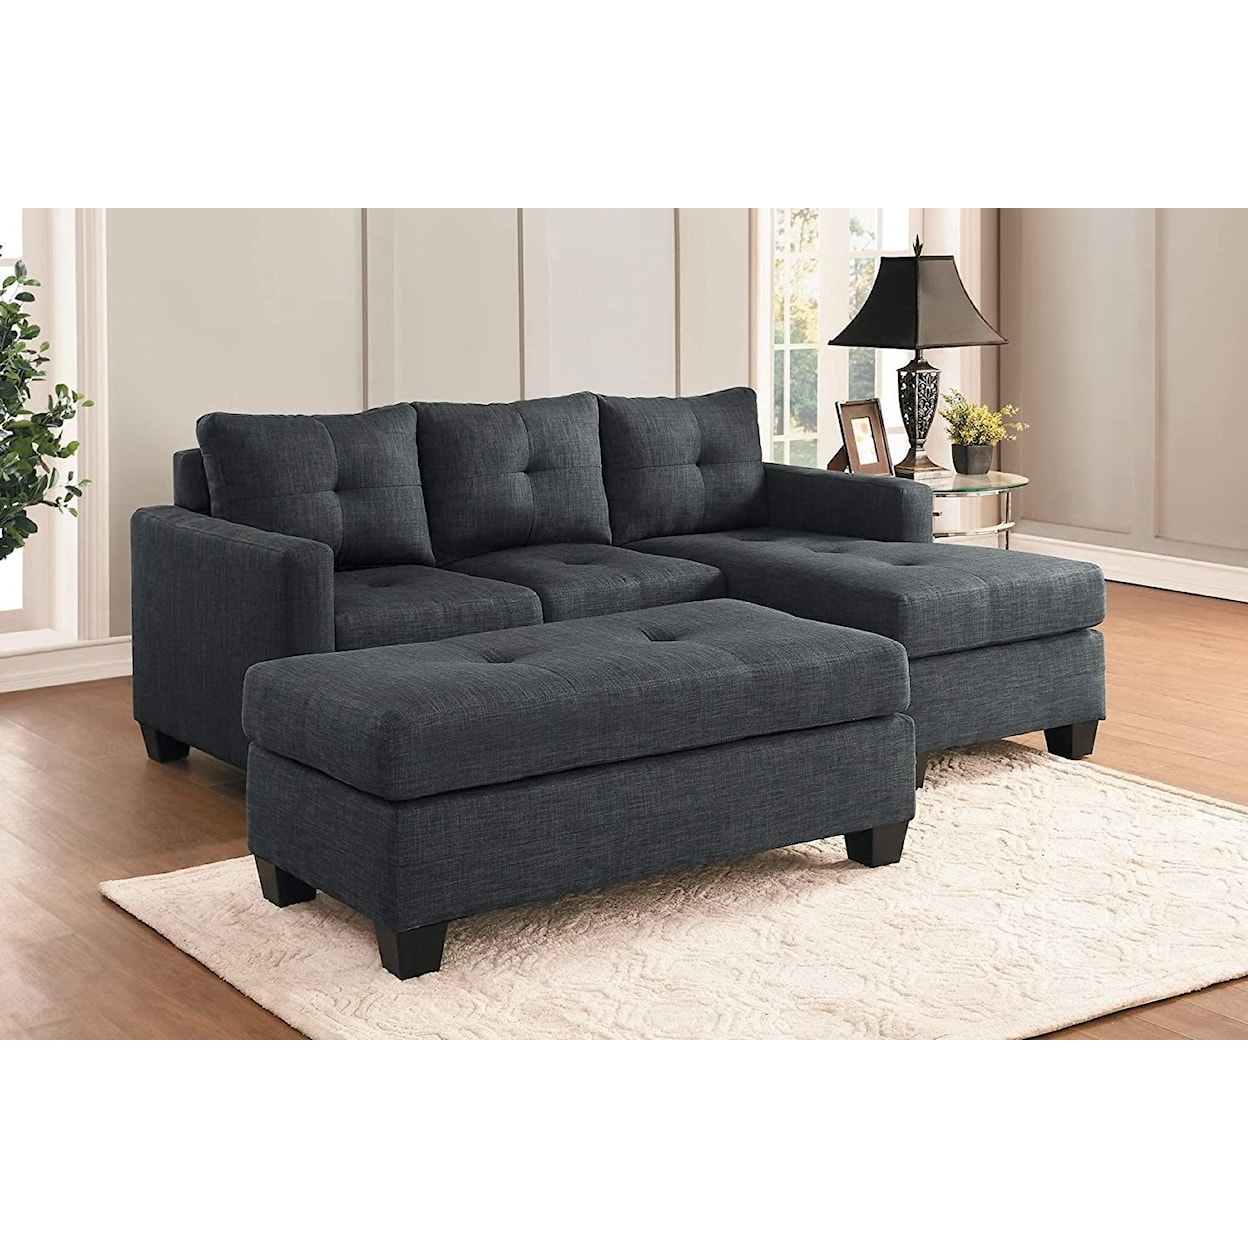 Homelegance Furniture Phelps Reversible Sofa Chaise and Ottoman